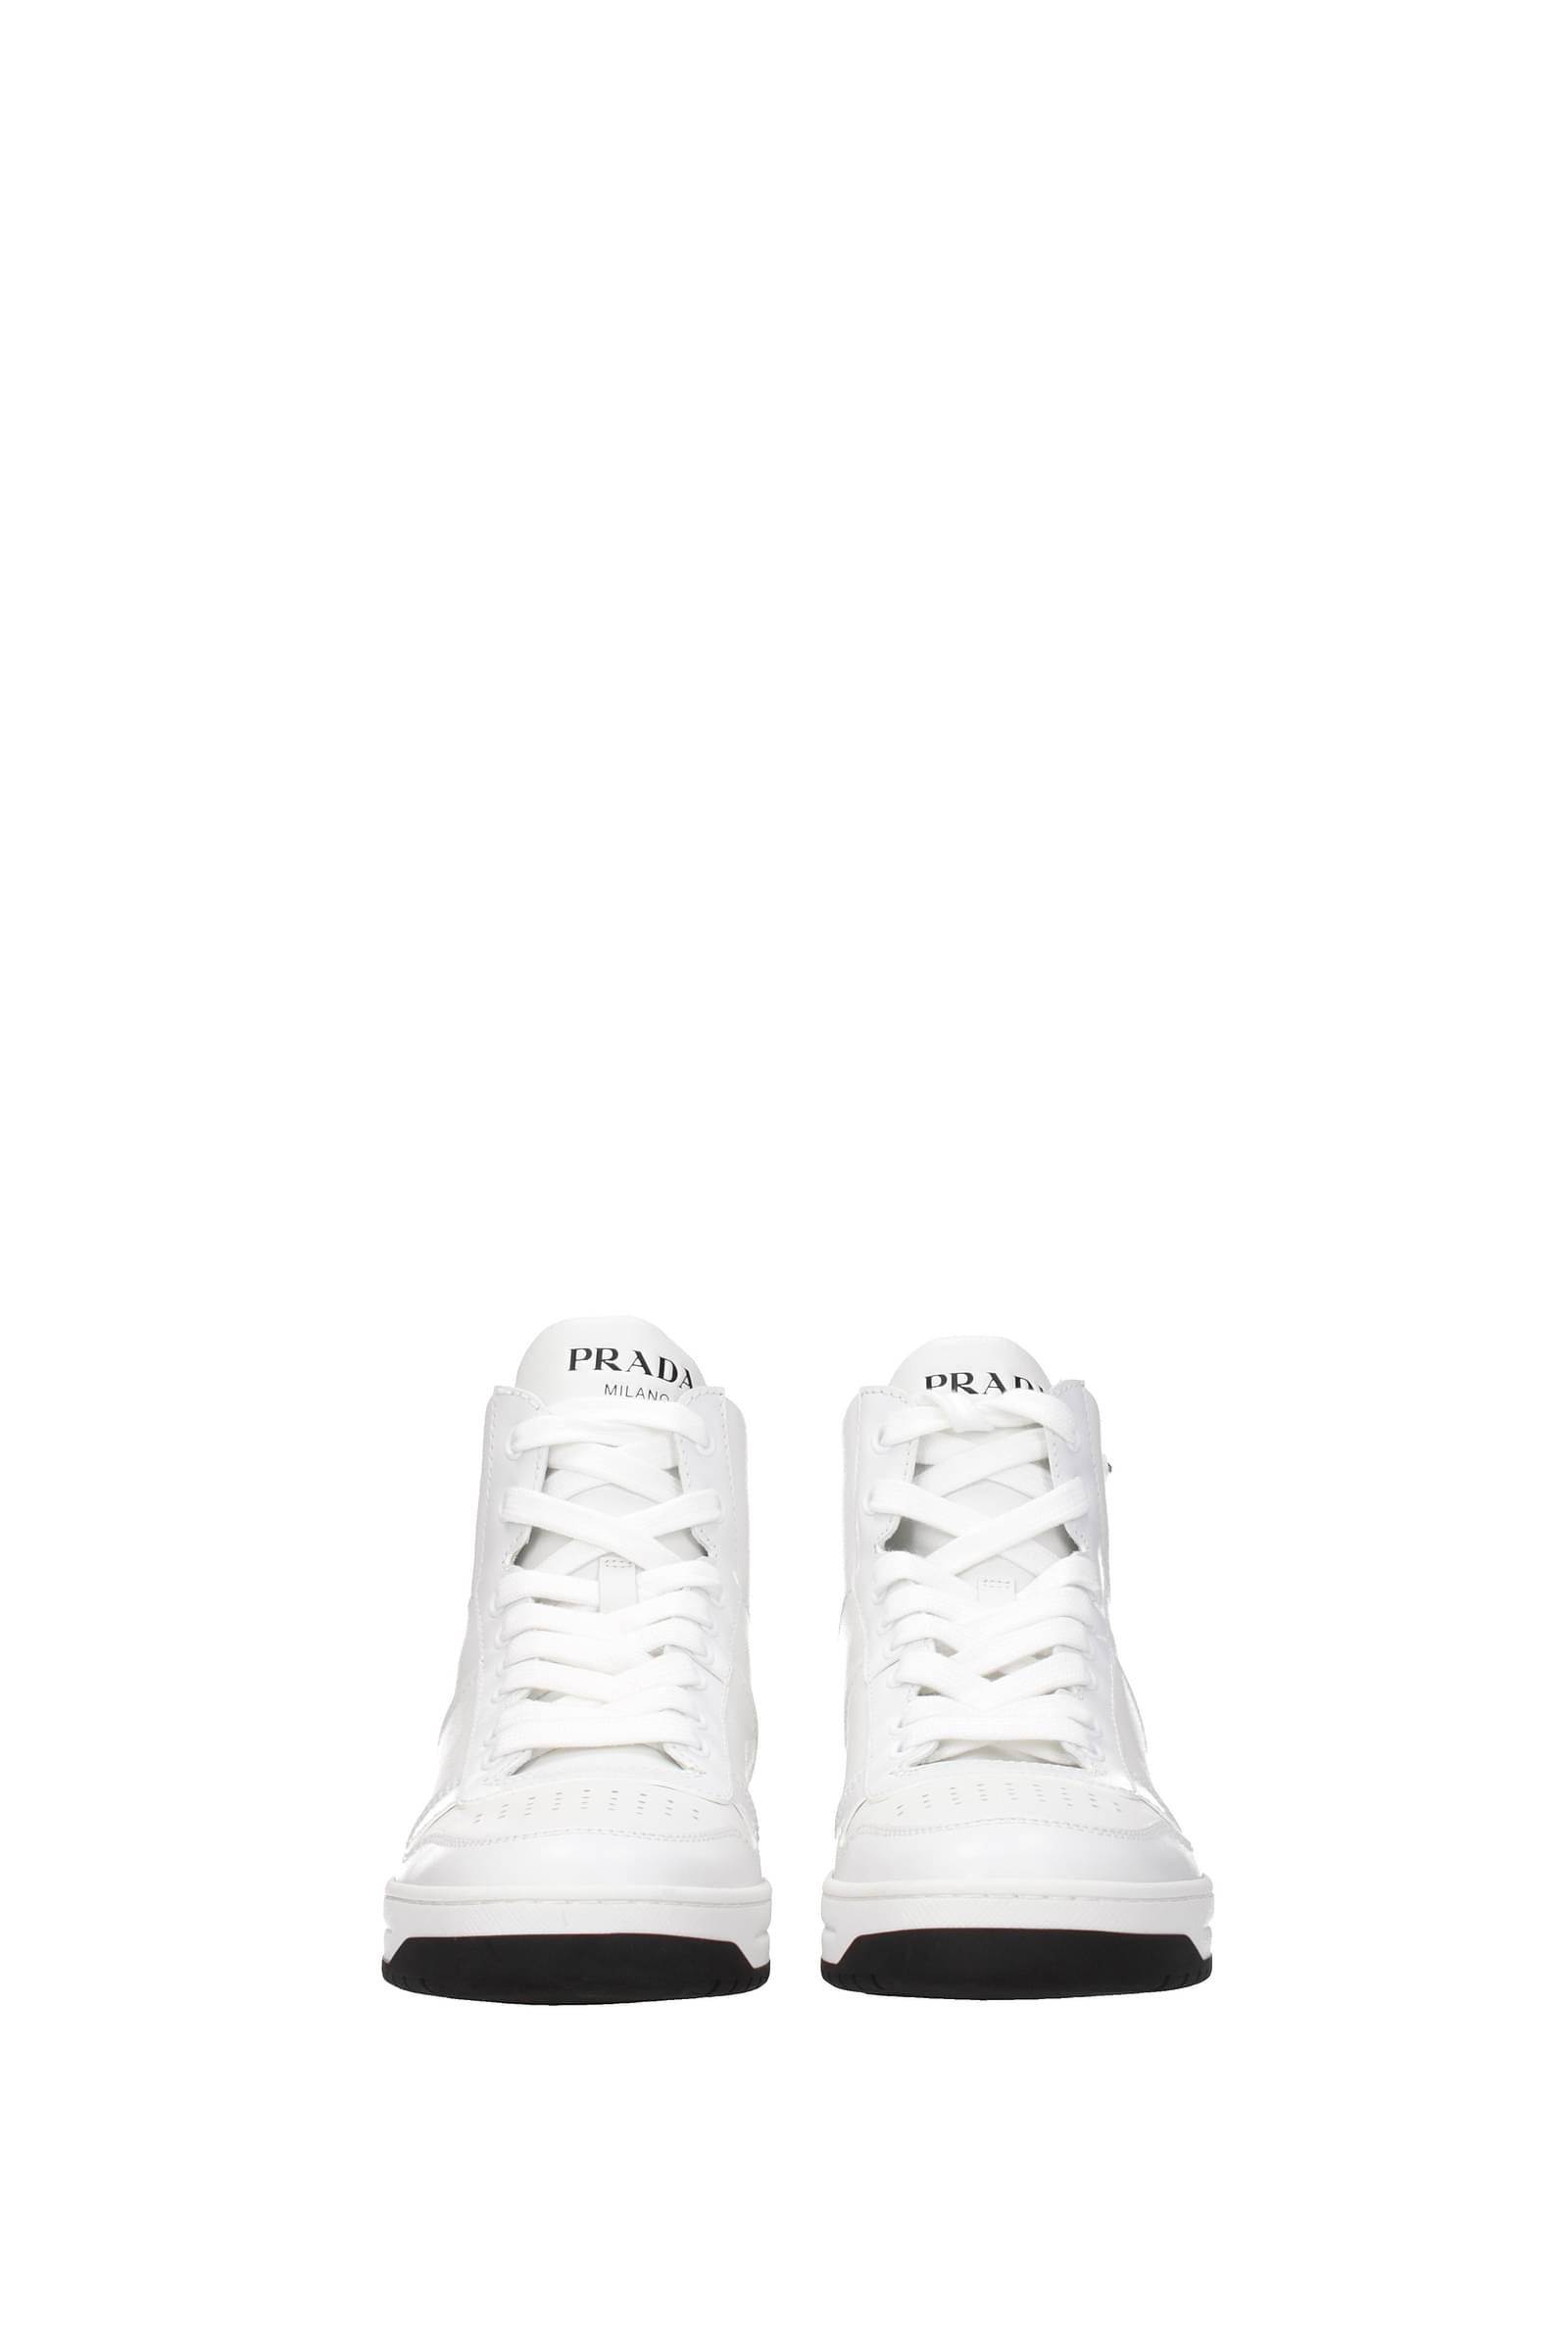 Prada Sneakers Downtown Leather Black in White | Lyst